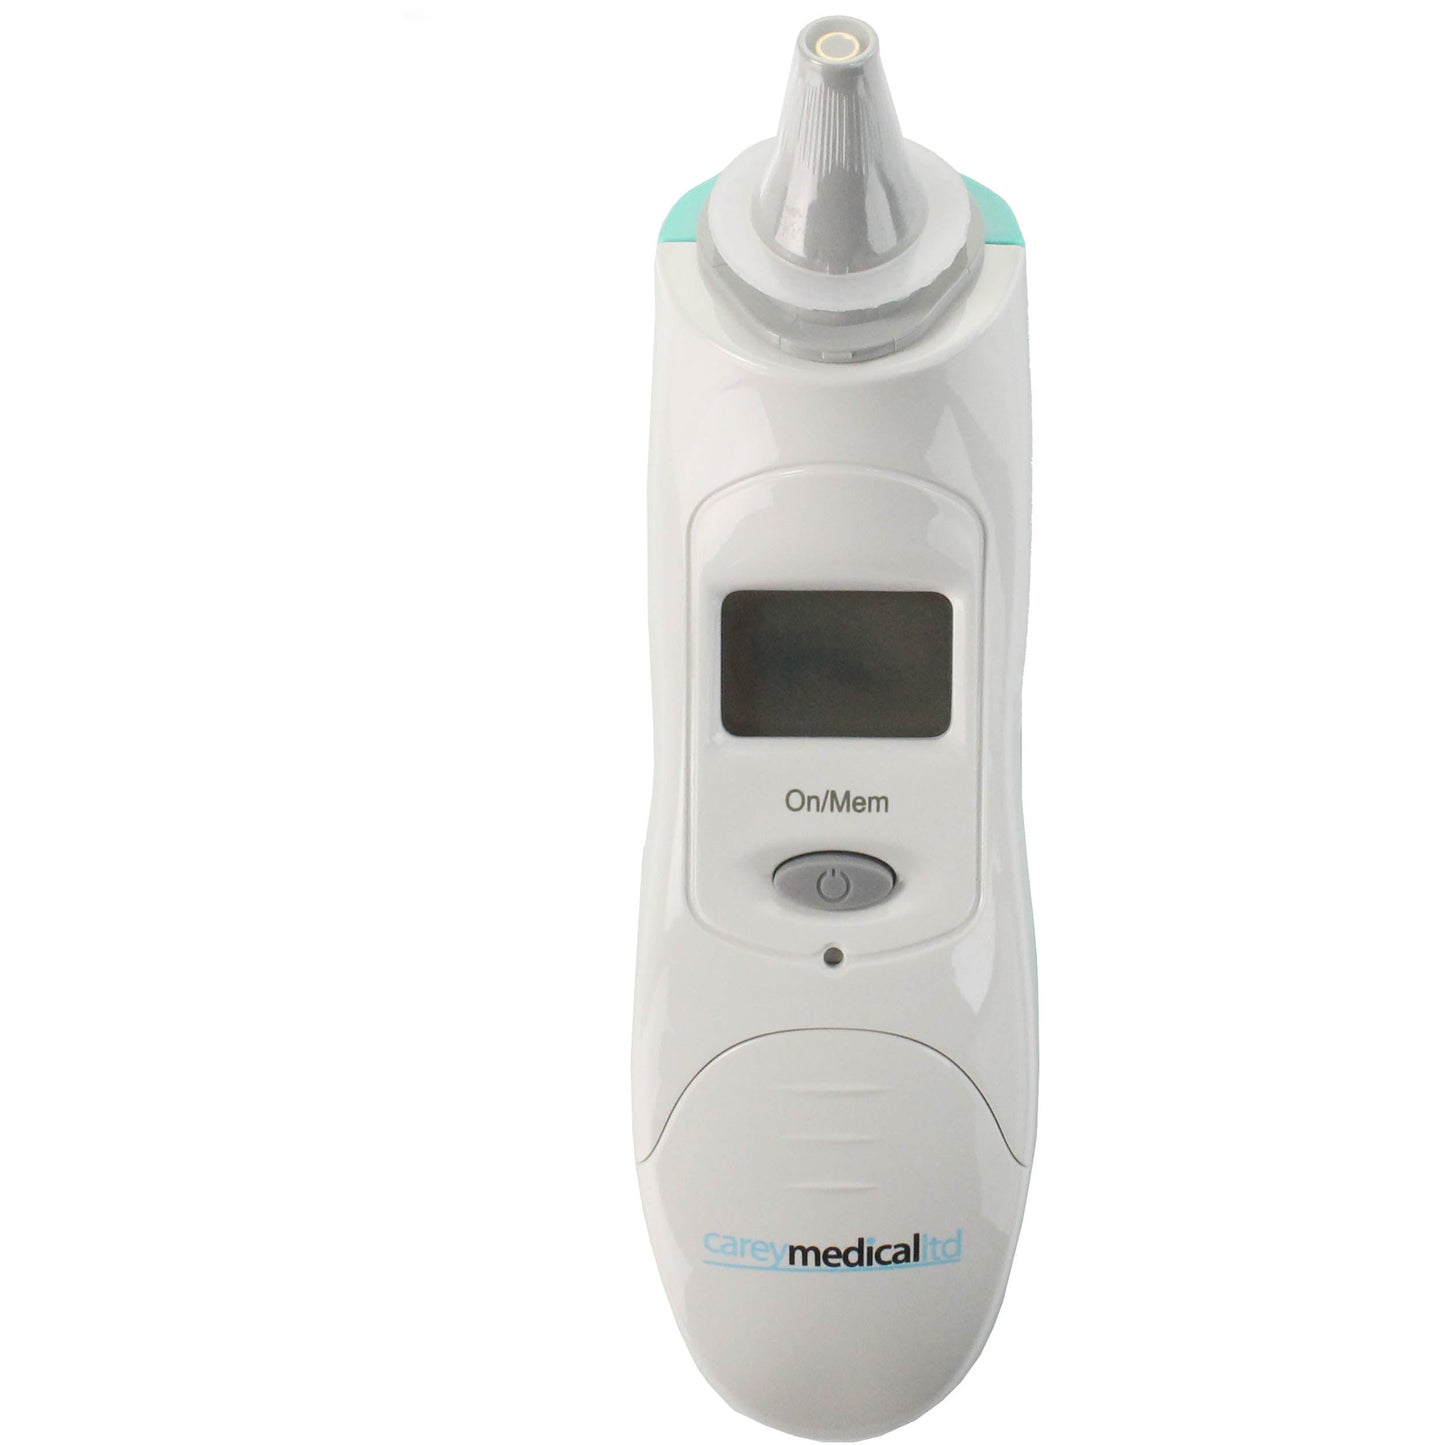 Radiant TH889J Tympanic Ear Thermometer